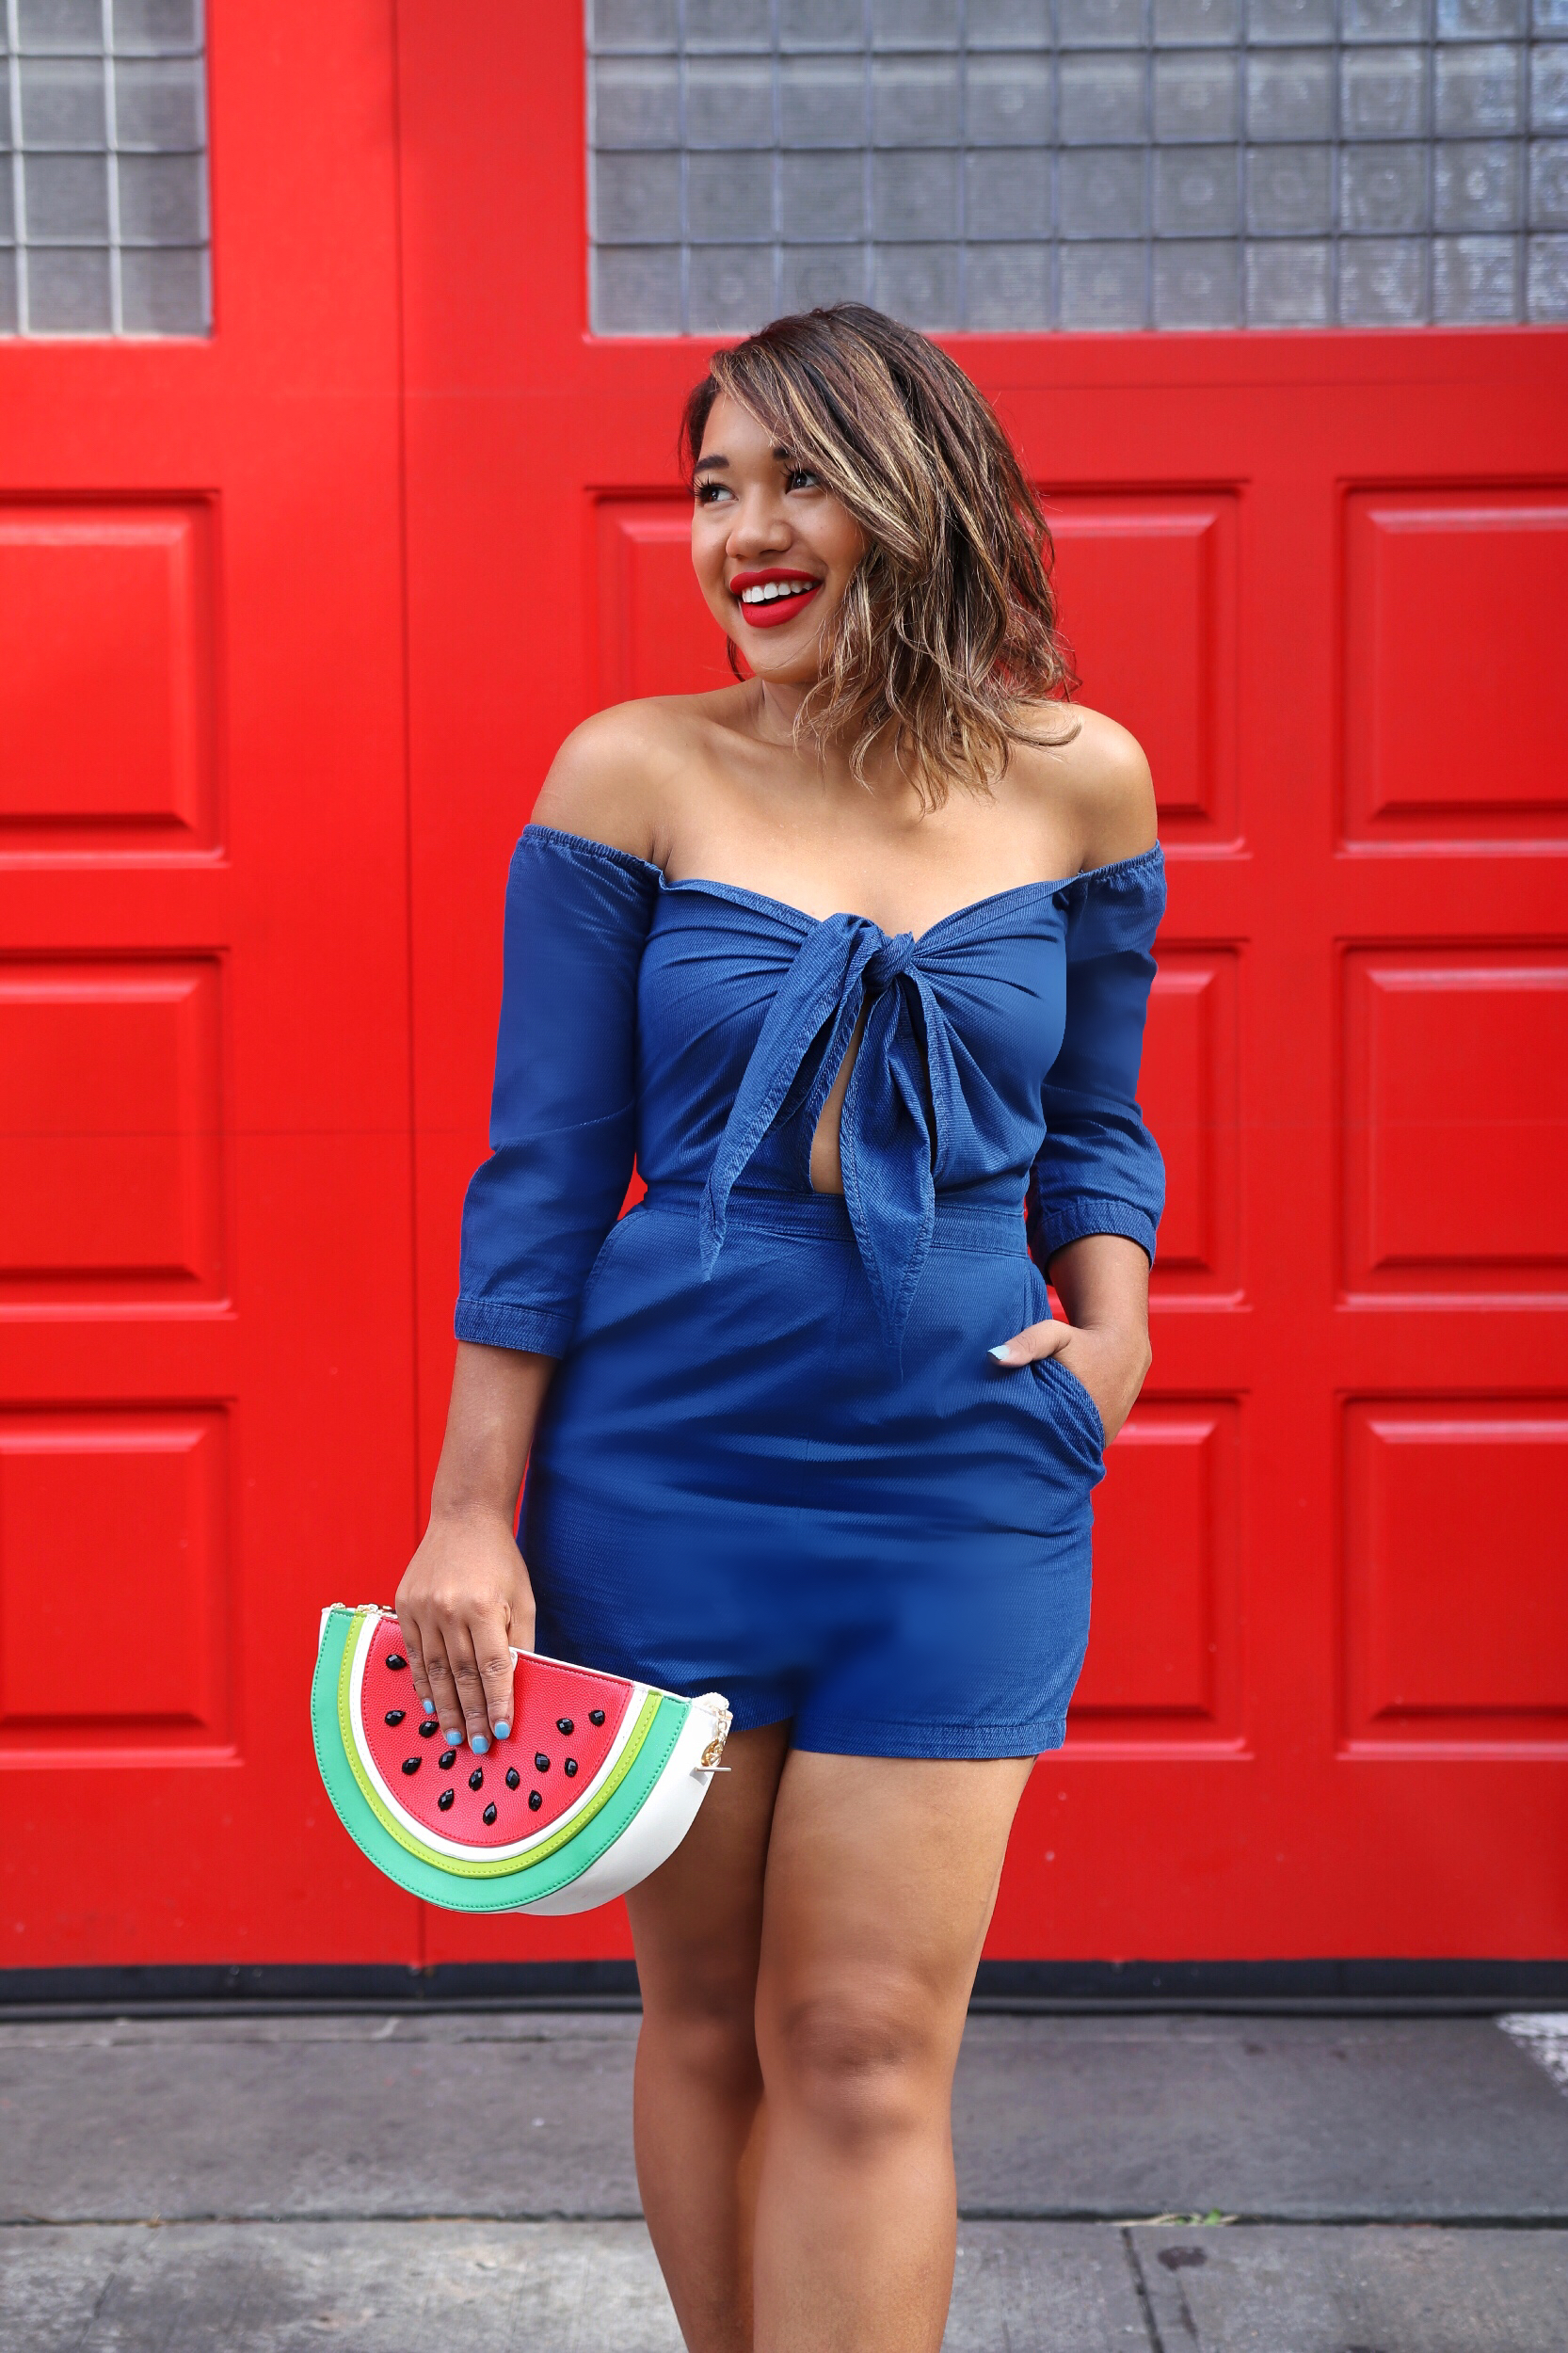 denim romper denim asos romper denim romper bow romper off the shoulder romper red lip watermelon clutch colormecourtney color me courtney colormecourtney.com @colormecourtney color me courtney instagram color me courtney blog black fashion bloggers new york city fashion blogger NYC fashion blogger nyc fashion blogger new york juliah engle fashion blog african american fashion blogger vogue fashion pinterest fashion street style blogger style what bloggers wear best fashion bloggers rach martino fashion bloggers julia hengle gal meets glam with love from kat bloggers to follow taylor swift style zooey deschanel style taylor swift fashion zooey deschanel fashion amber filler barefoot blonde the best fashion bloggers best fashion bloggers new york pink peonies rachel parcell fun fashion blogger kate spade fashion blogger stripe fashion blogger polka dot fashion bloggers happy fashion blogger what to wear spring fashion spring style spring outfits spring style guide denim romper summer outfit summer style guide what to wear for summer bbq outfit summer bbq summer style watemelon watermelon clutch 